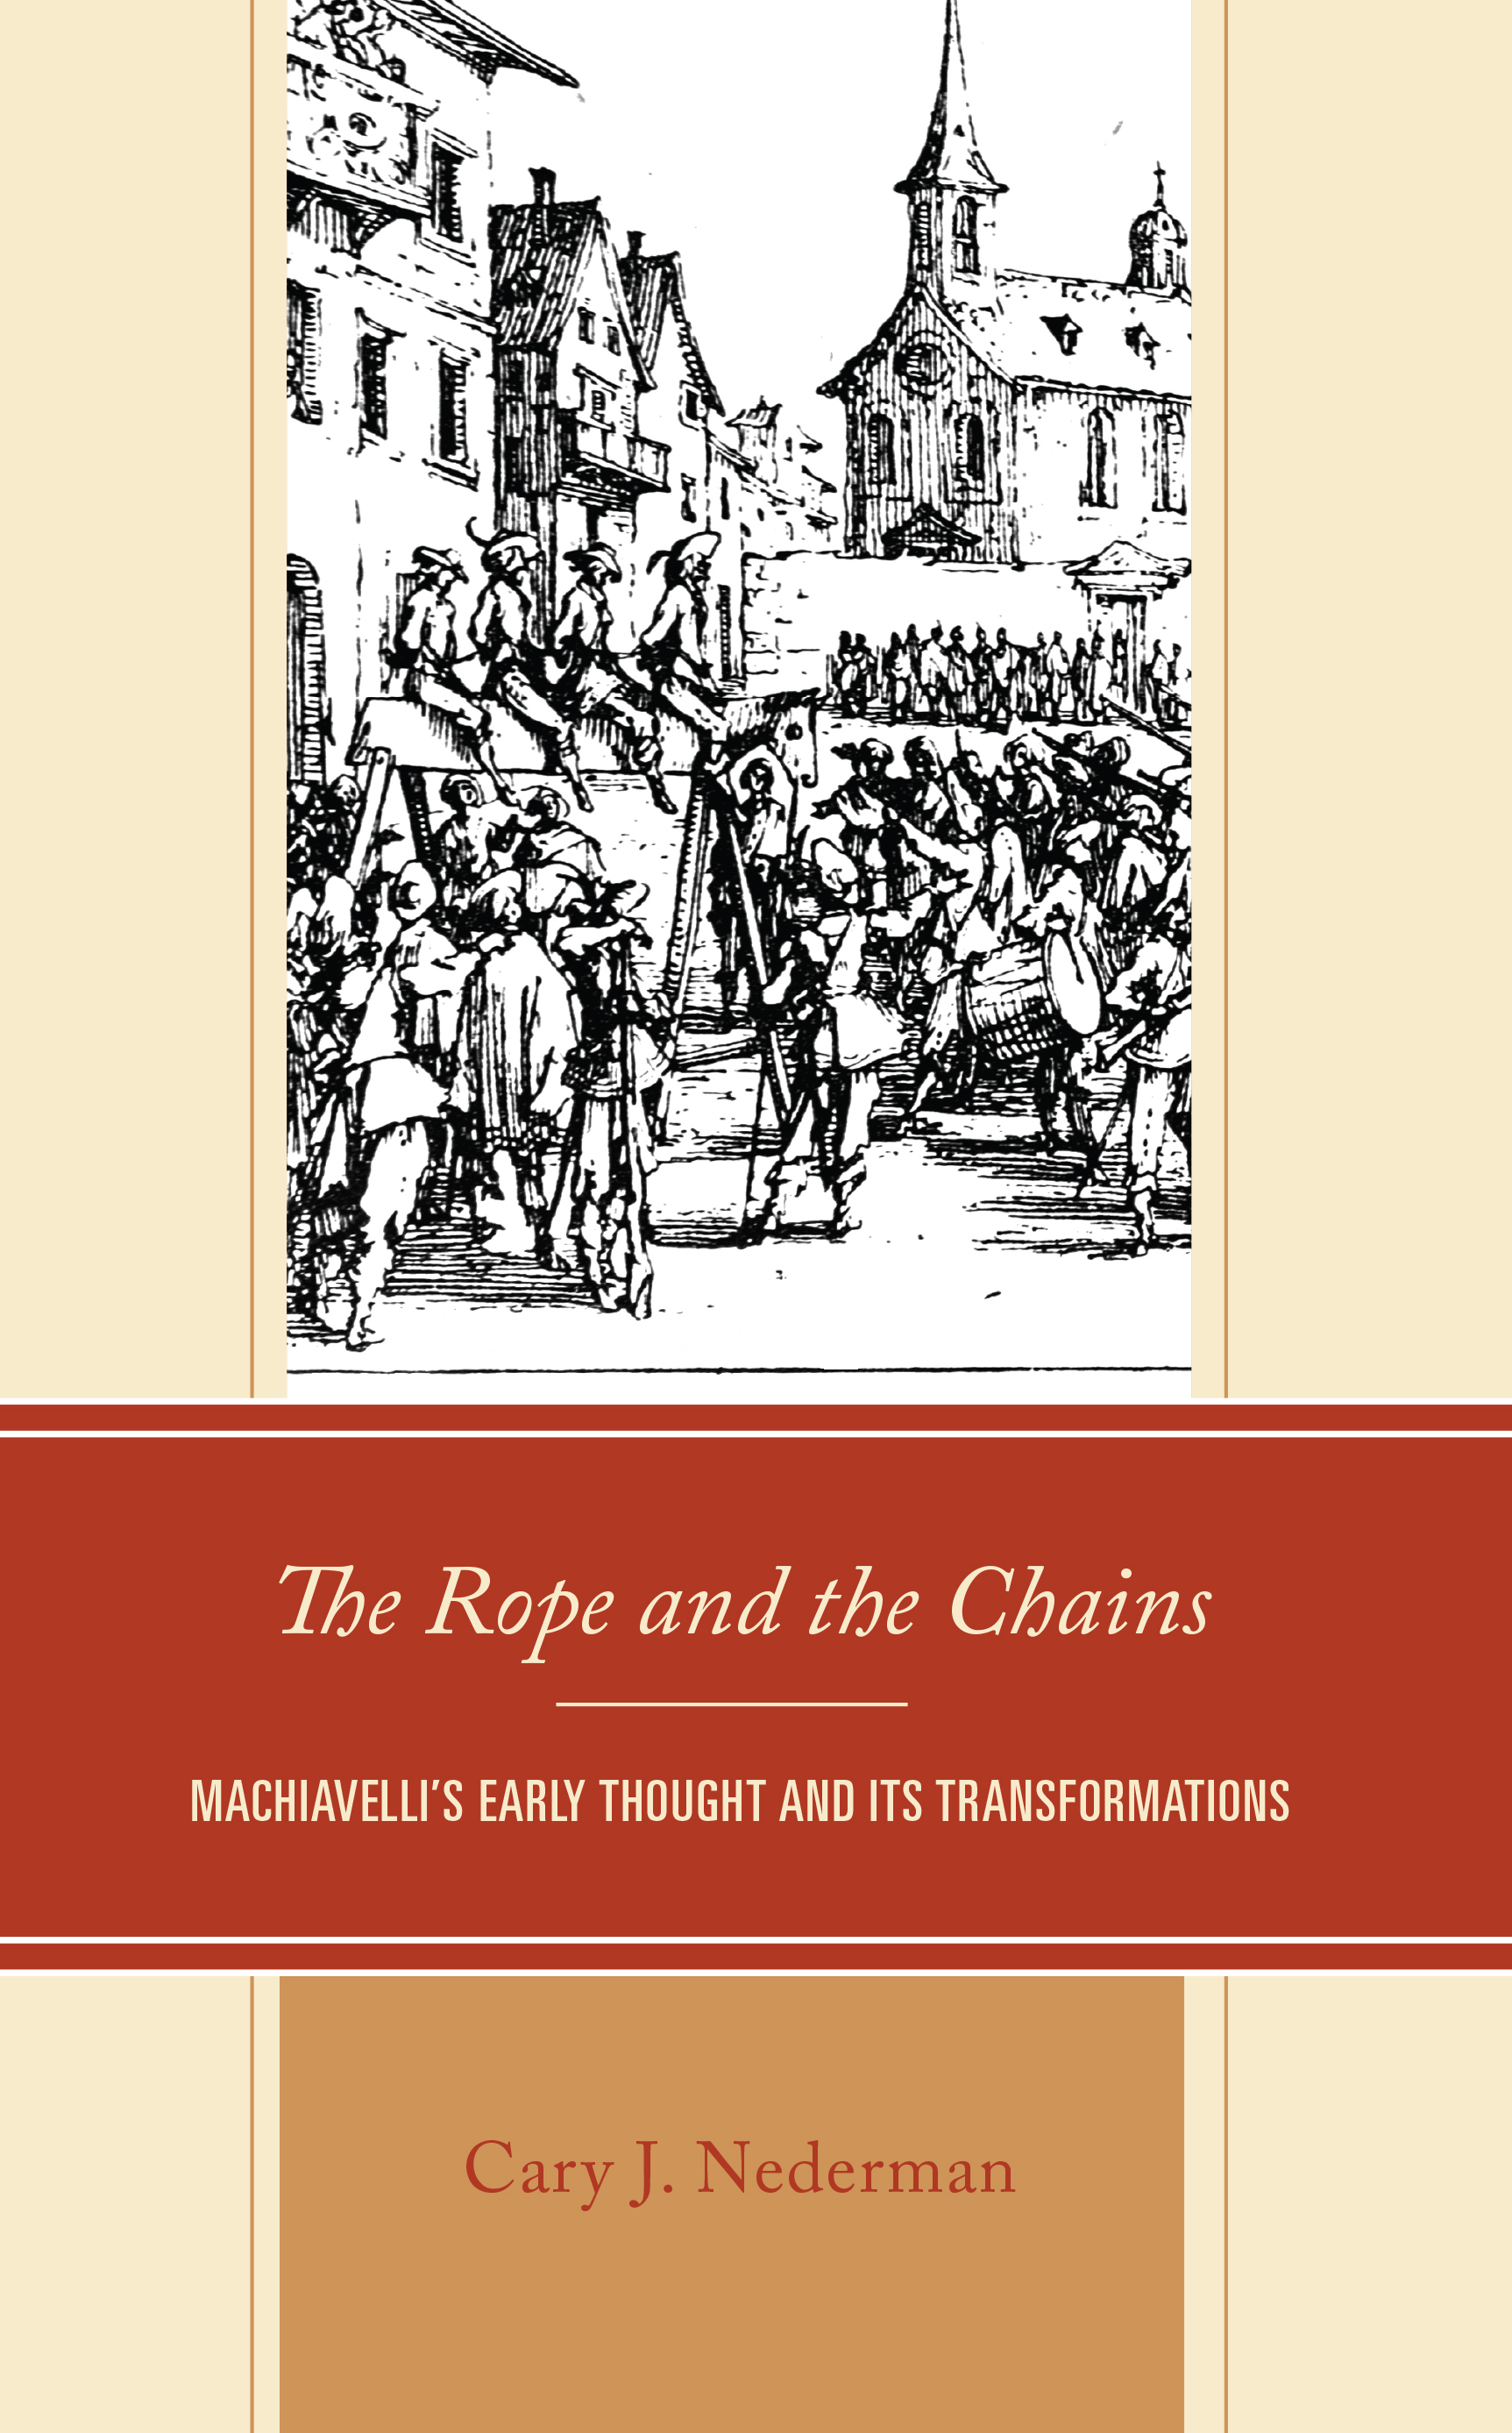 The Rope and the Chains: Machiavelli’s Early Thought and Its Transformations